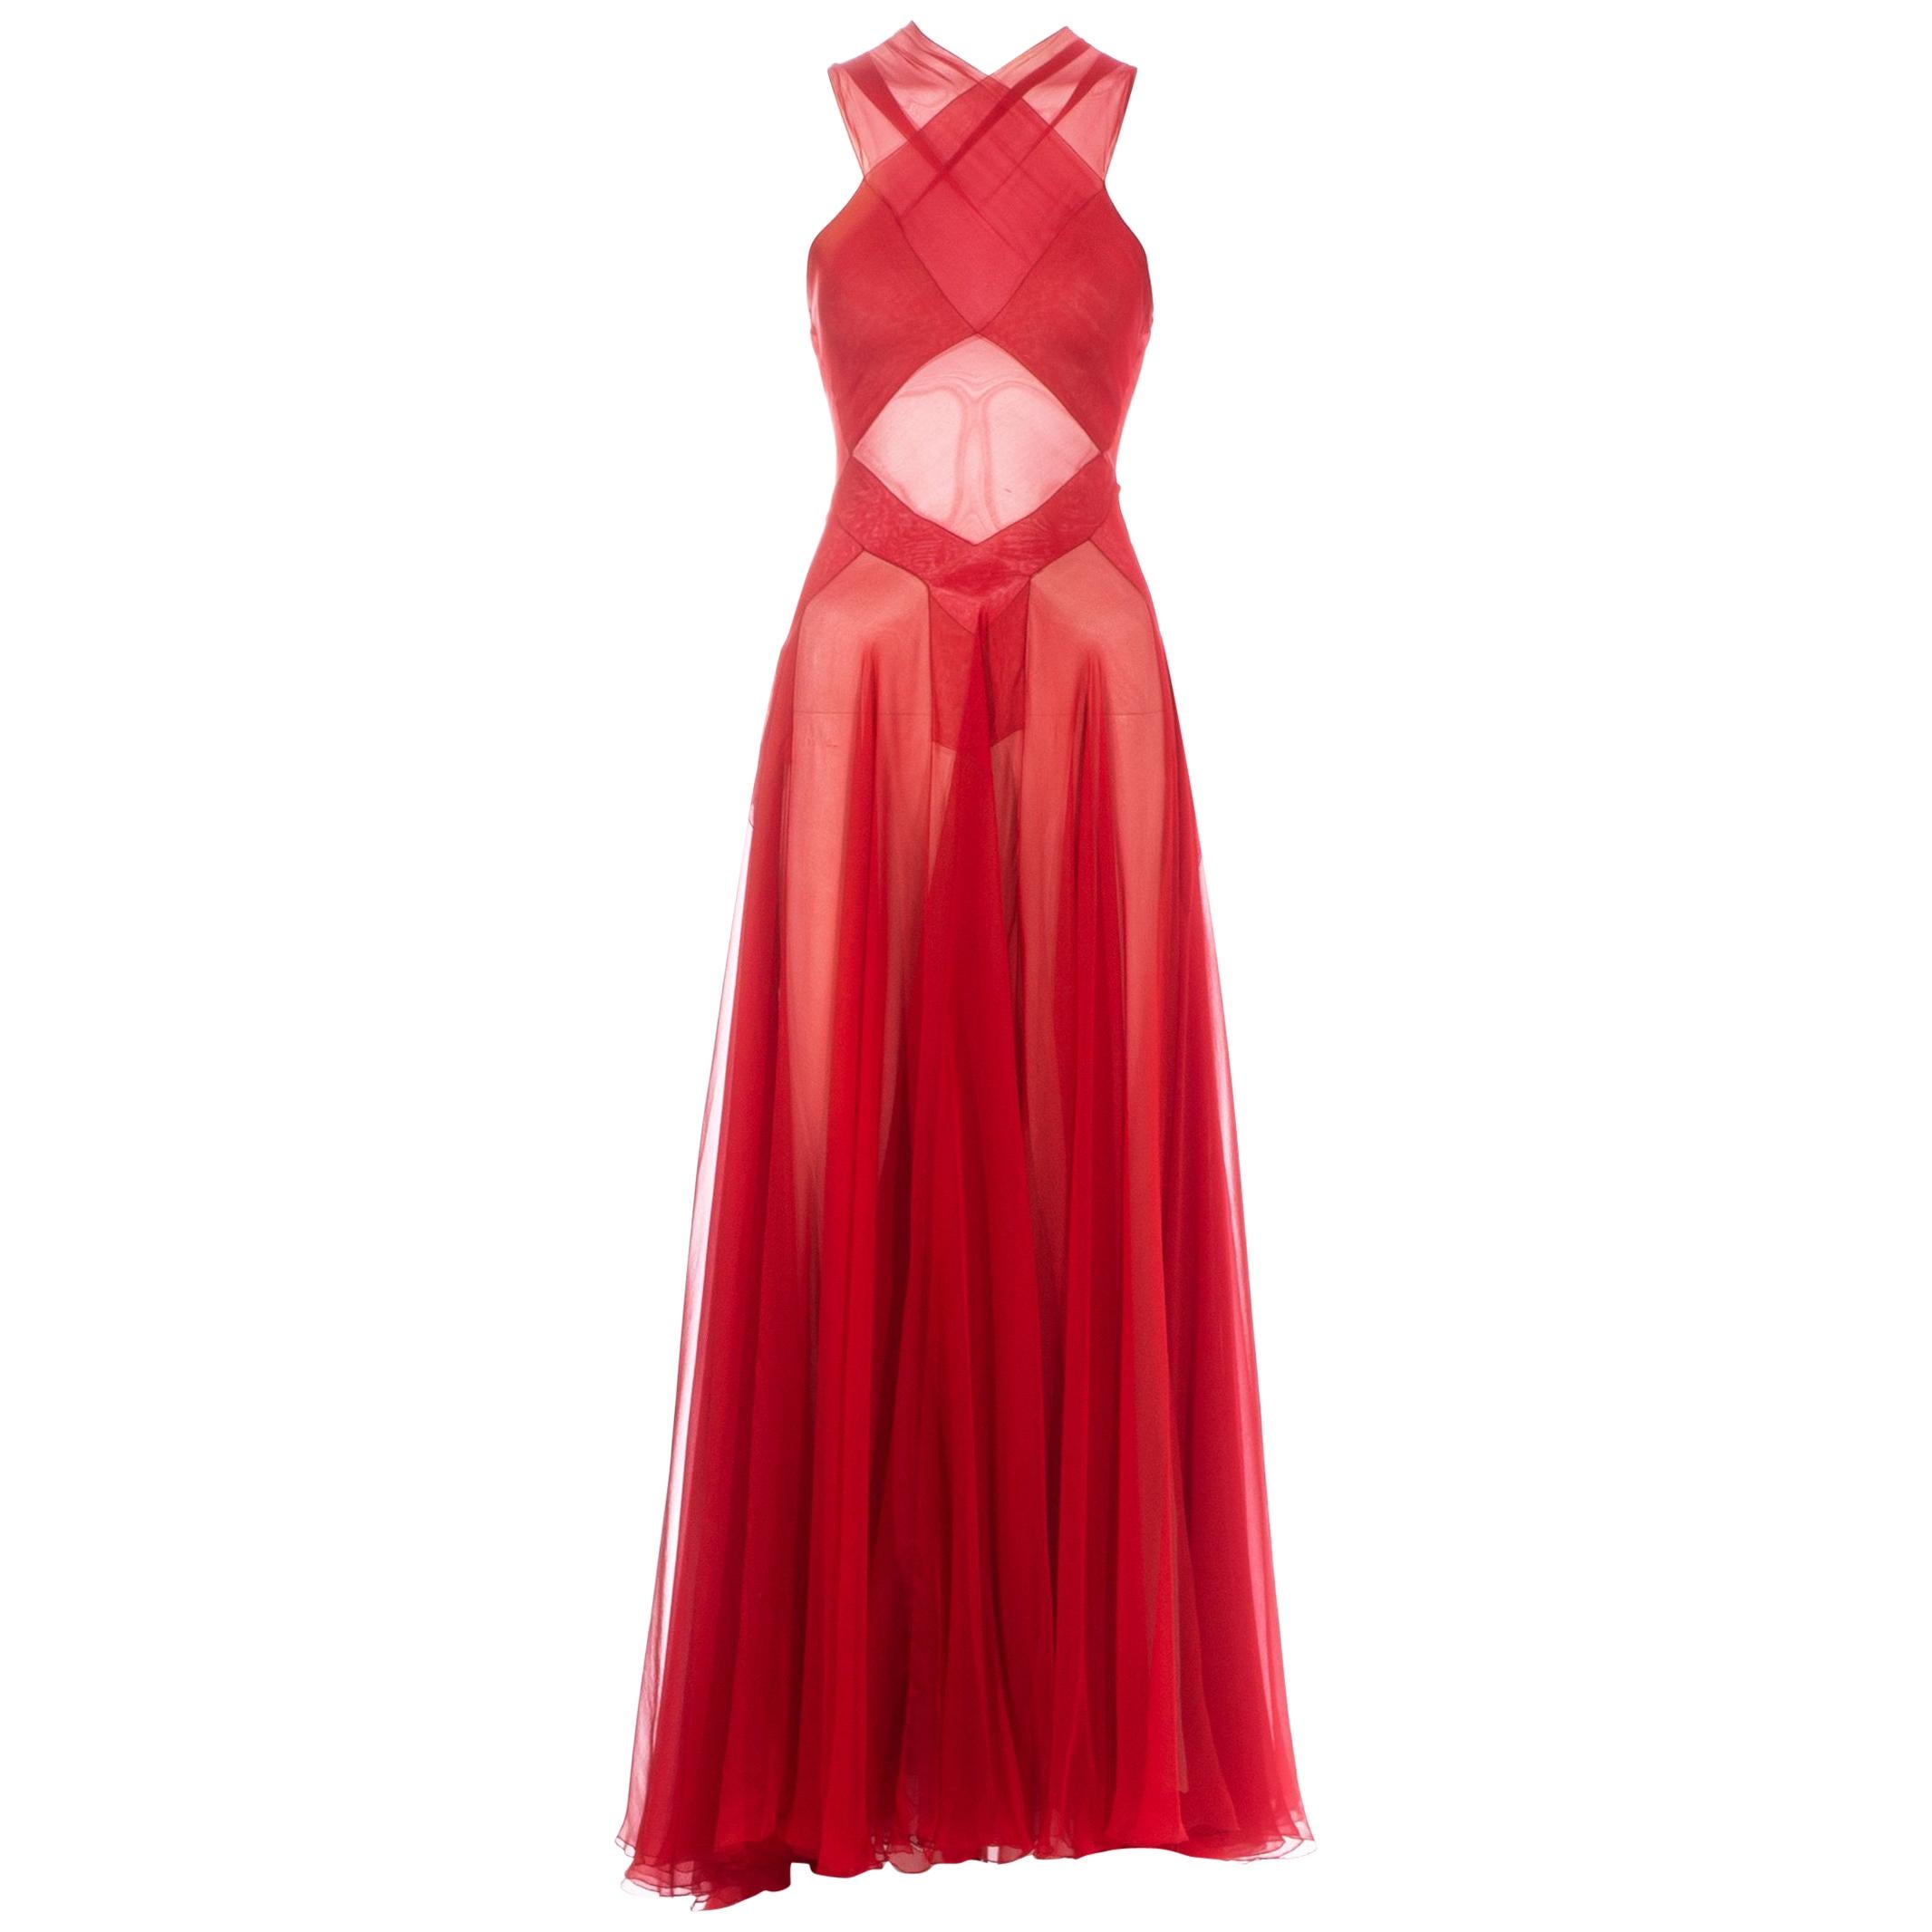 Azzedine Alaia Couture red silk evening dress, c. 1996